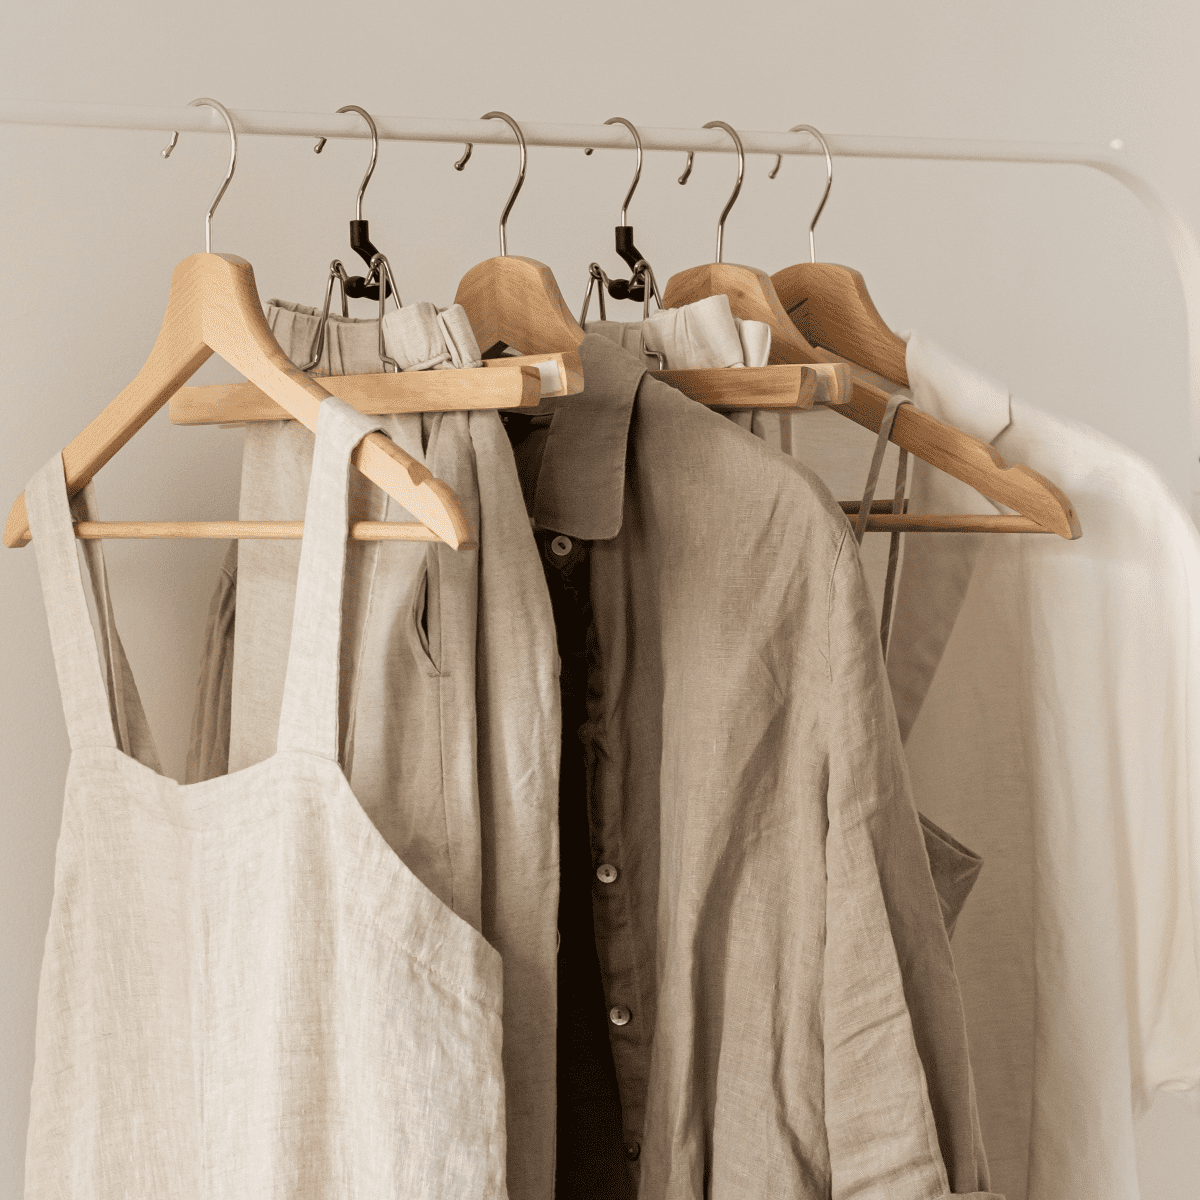 How to Wash Clothes: Make Whites White, and Colors Bright! - Dengarden